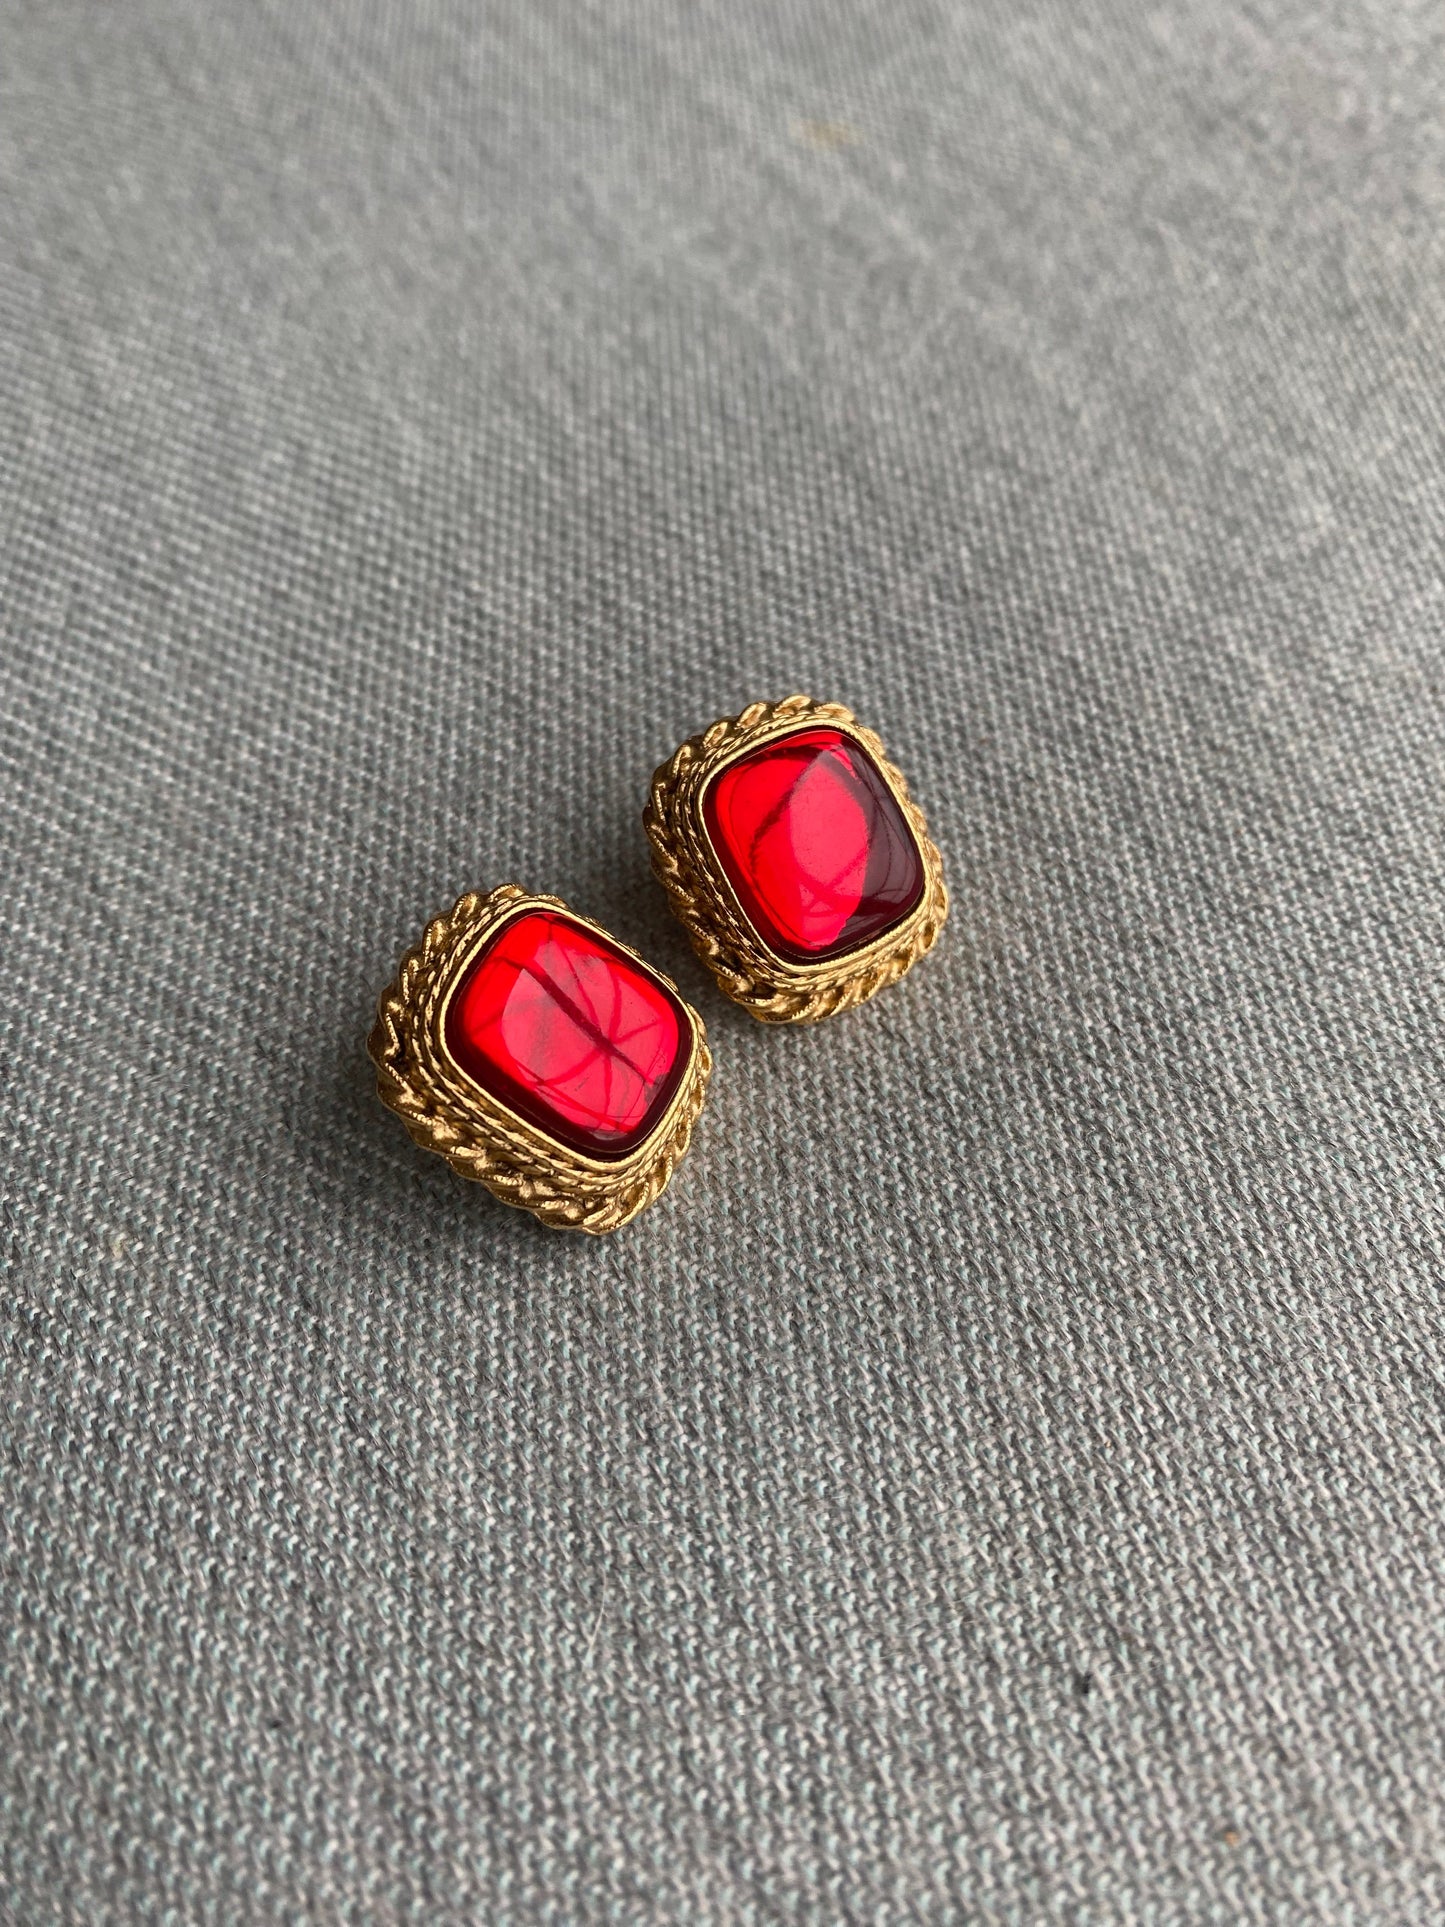 80's Ruby Square Cabachon Gold Rope Pierced Earrings